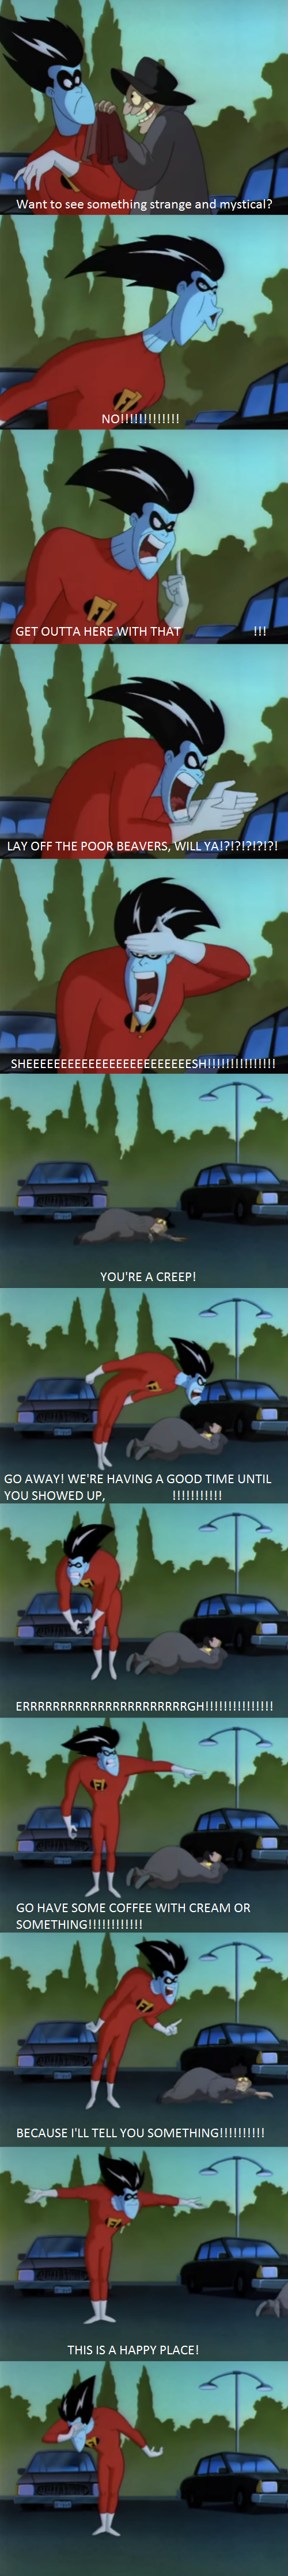 Freakazoid Knows How To Handle Creeps Blank Meme Template